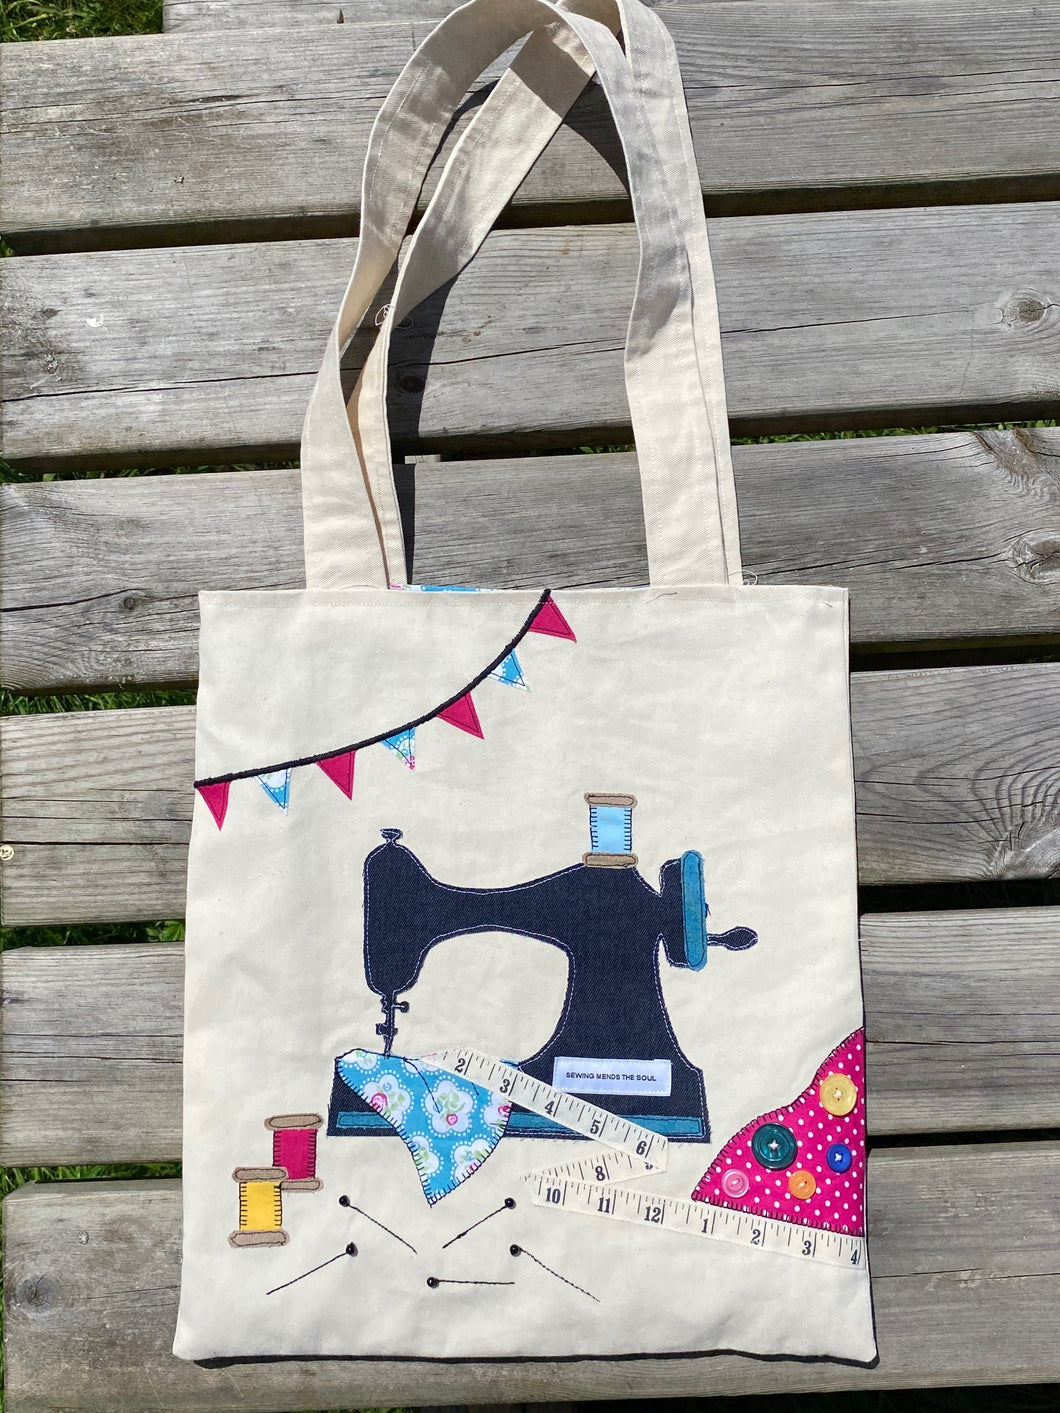 Sewer's Paradise Applique Tote Bag Pattern